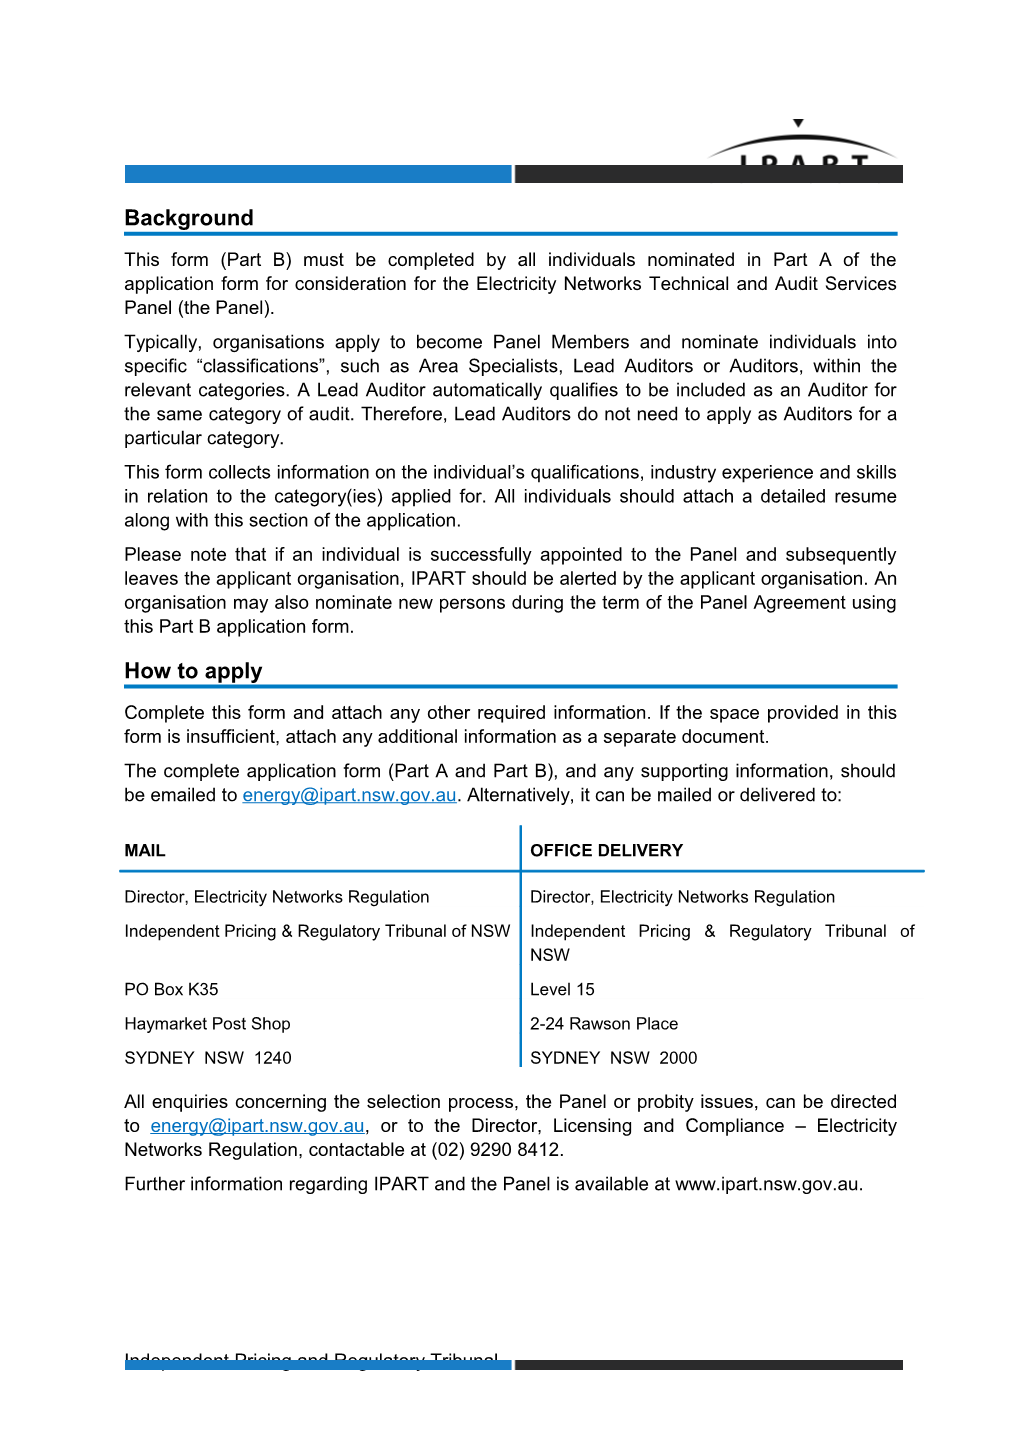 Electricity Networks Regulation Technical and Audit Services Panel - Application Form Part B